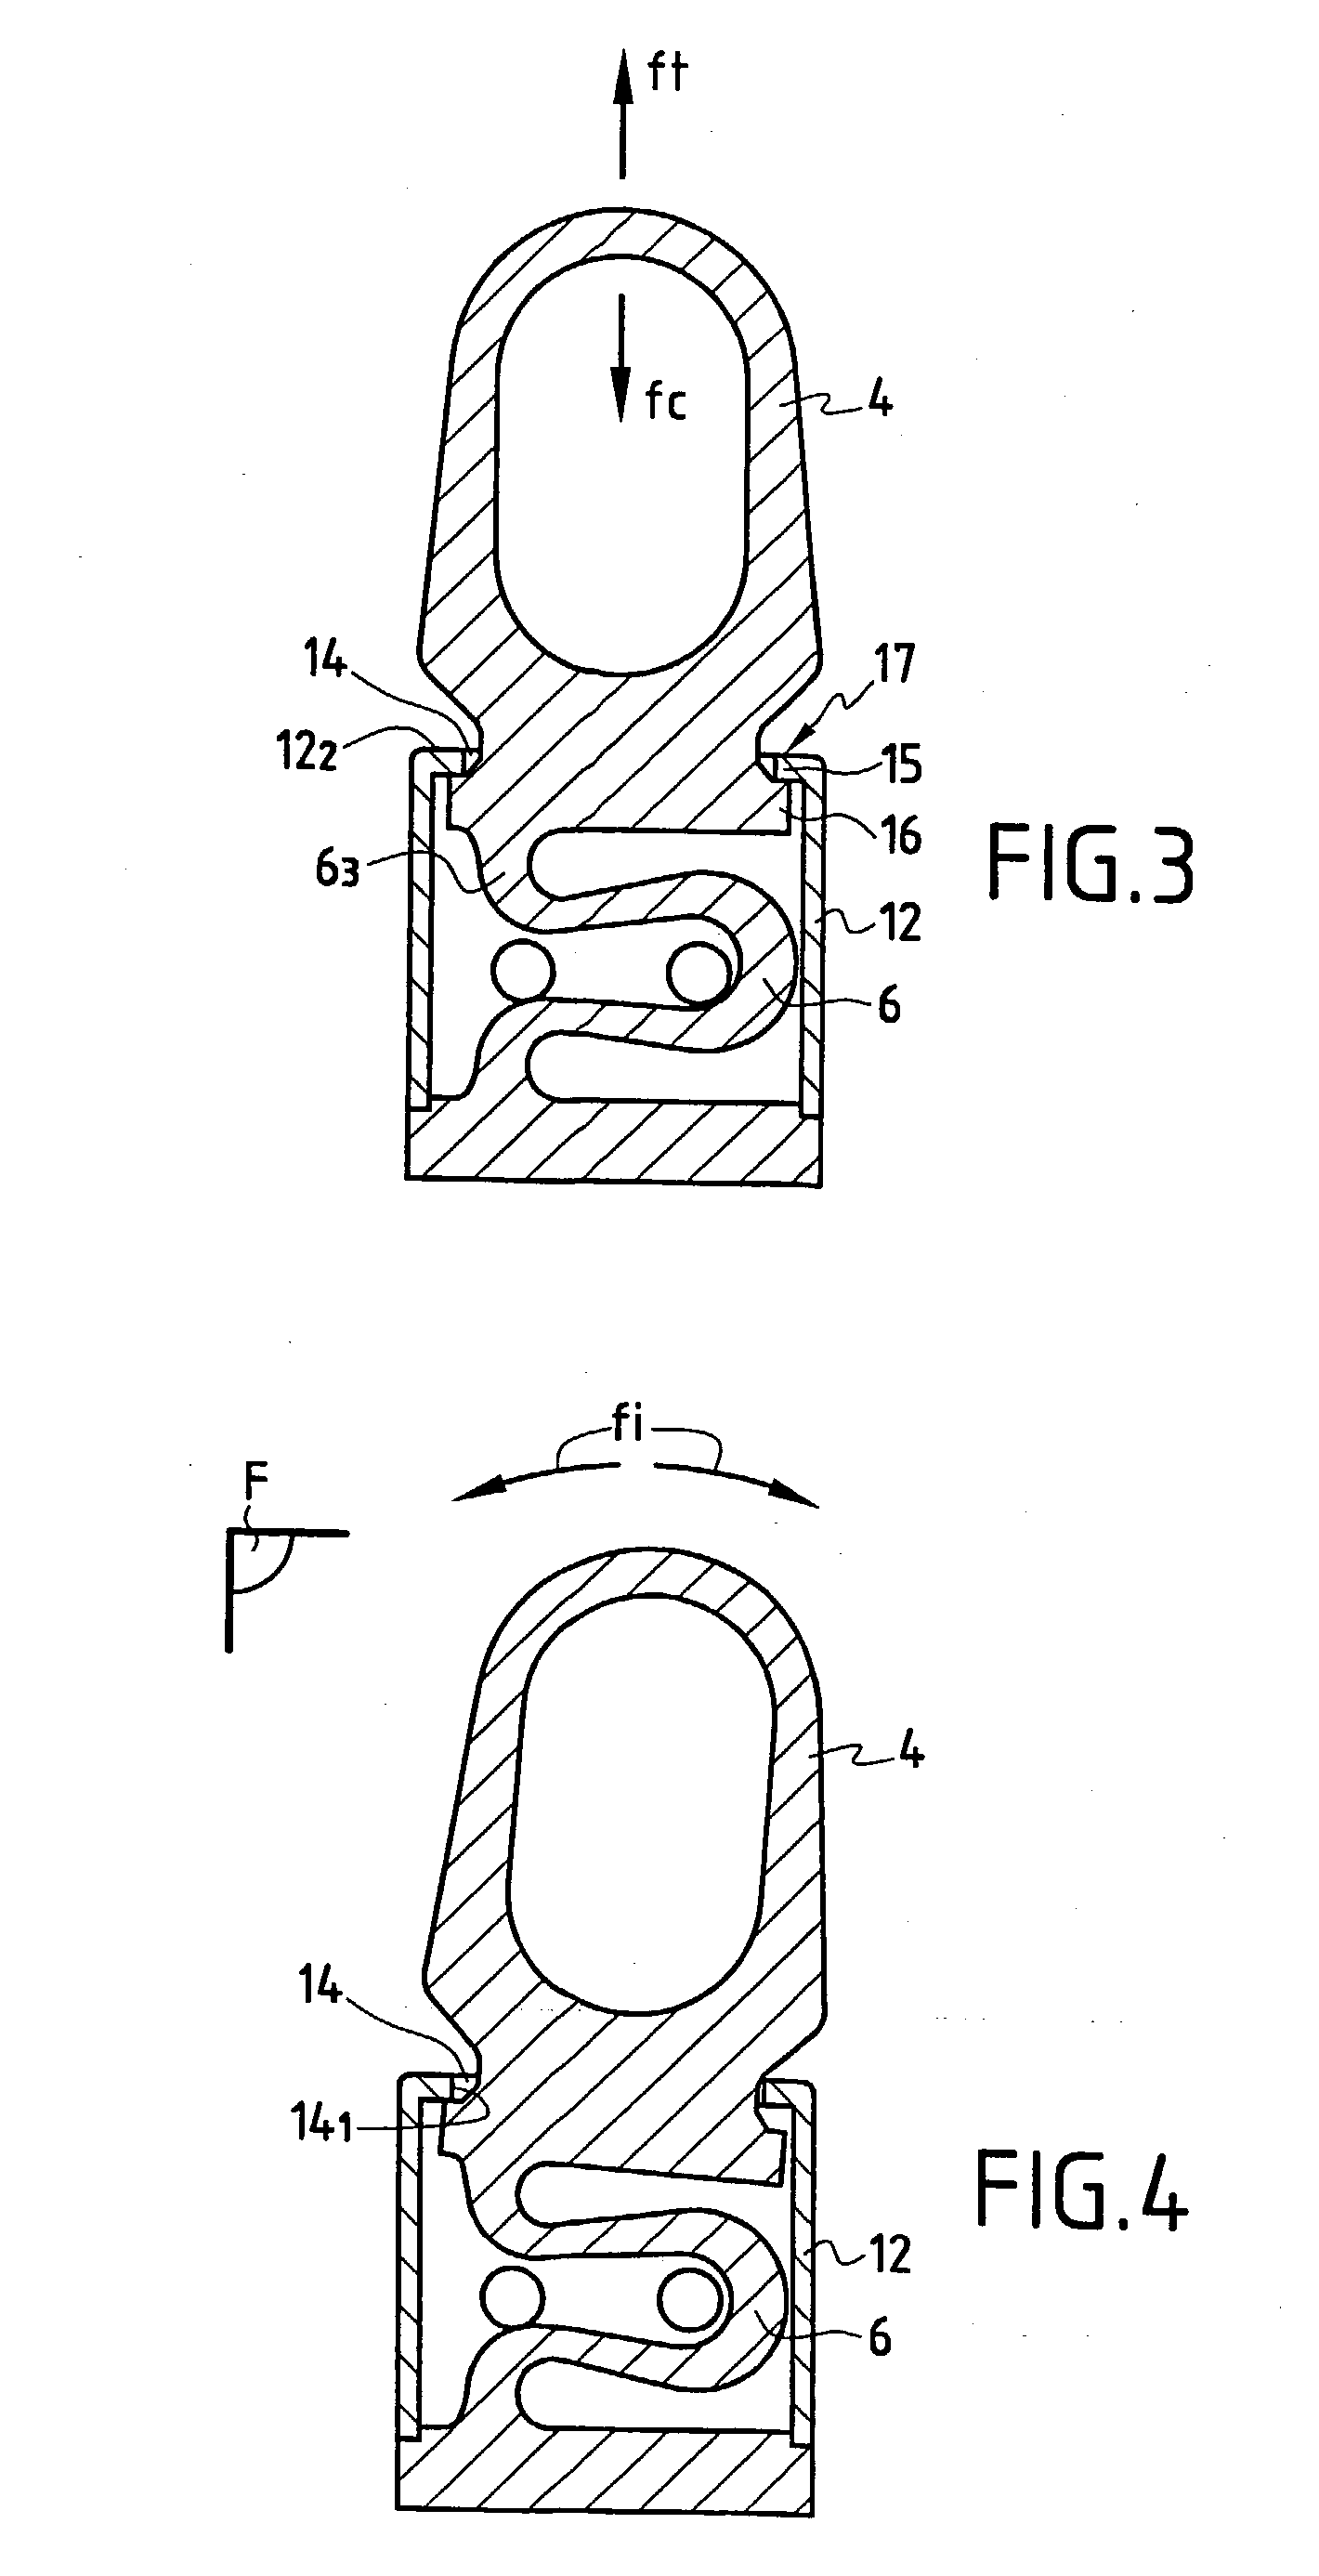 Dynamic intervertebral connection device with controlled multidirectional deflection